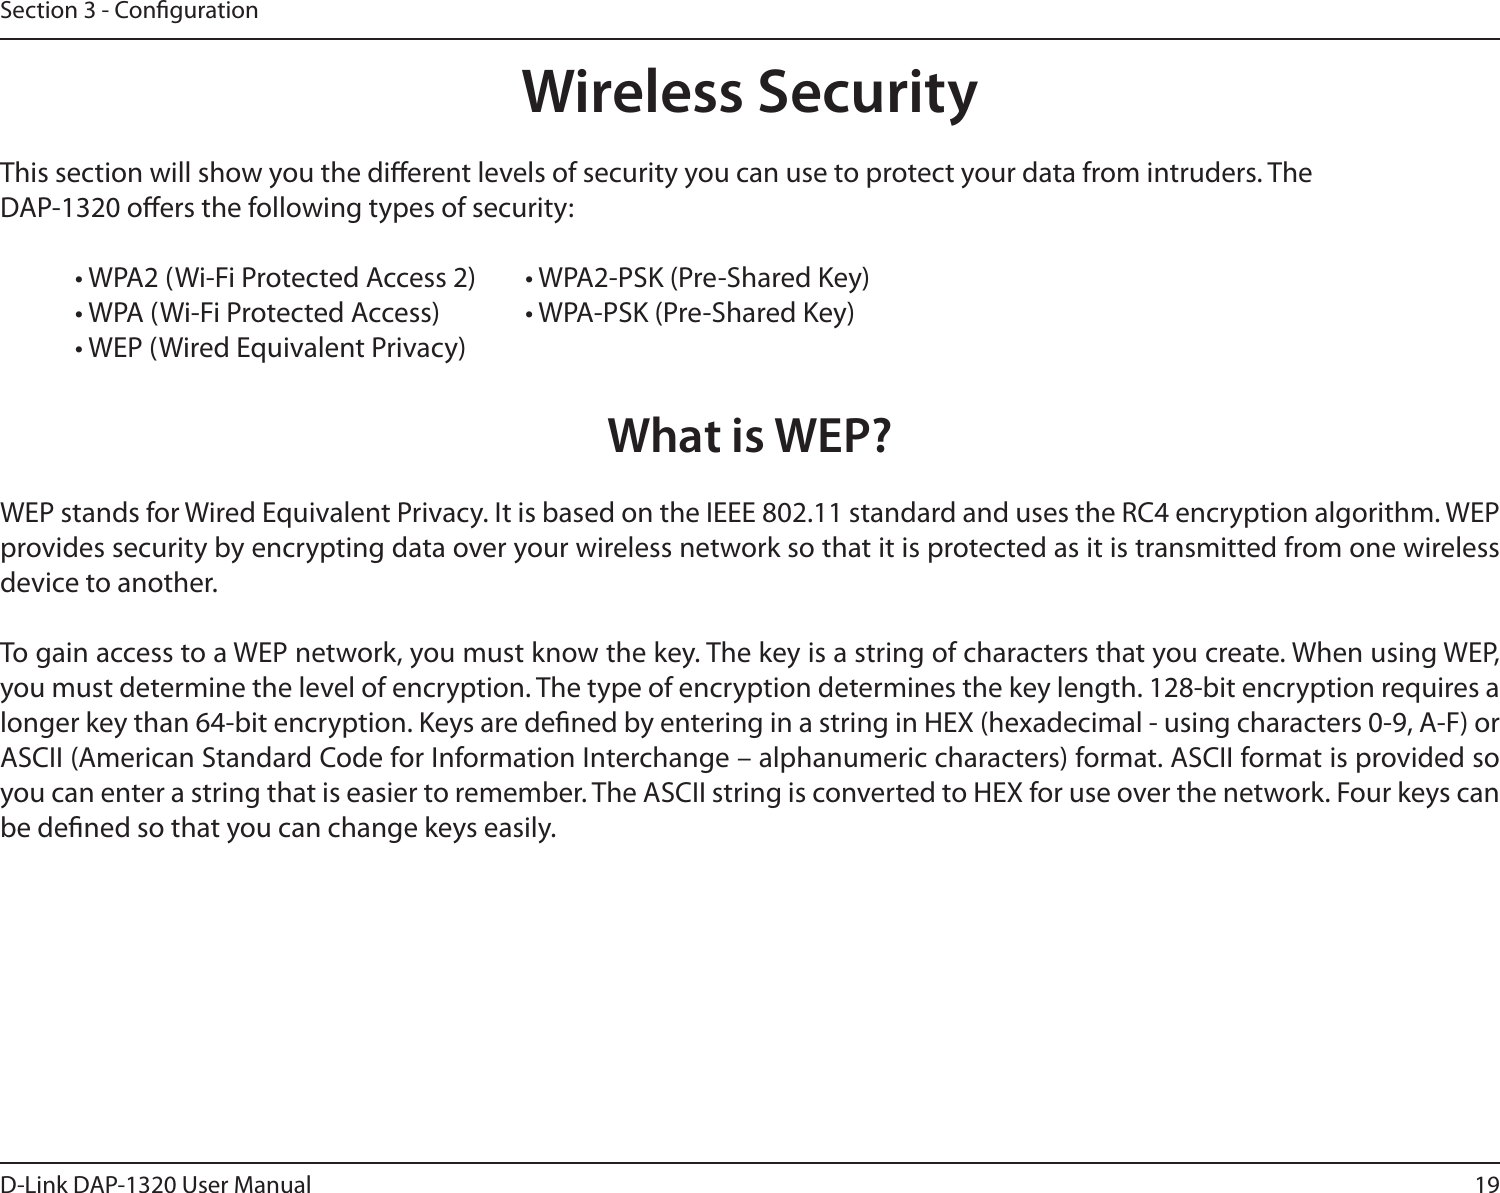 19D-Link DAP-1320 User ManualSection 3 - CongurationWireless SecurityThis section will show you the dierent levels of security you can use to protect your data from intruders. TheDAP-1320 oers the following types of security:  • WPA2 (Wi-Fi Protected Access 2)   • WPA2-PSK (Pre-Shared Key)  • WPA (Wi-Fi Protected Access)   • WPA-PSK (Pre-Shared Key)  • WEP (Wired Equivalent Privacy)What is WEP?WEP stands for Wired Equivalent Privacy. It is based on the IEEE 802.11 standard and uses the RC4 encryption algorithm. WEPprovides security by encrypting data over your wireless network so that it is protected as it is transmitted from one wireless device to another.To gain access to a WEP network, you must know the key. The key is a string of characters that you create. When using WEP, you must determine the level of encryption. The type of encryption determines the key length. 128-bit encryption requires alonger key than 64-bit encryption. Keys are dened by entering in a string in HEX (hexadecimal - using characters 0-9, A-F) or ASCII (American Standard Code for Information Interchange – alphanumeric characters) format. ASCII format is provided so you can enter a string that is easier to remember. The ASCII string is converted to HEX for use over the network. Four keys can be dened so that you can change keys easily.